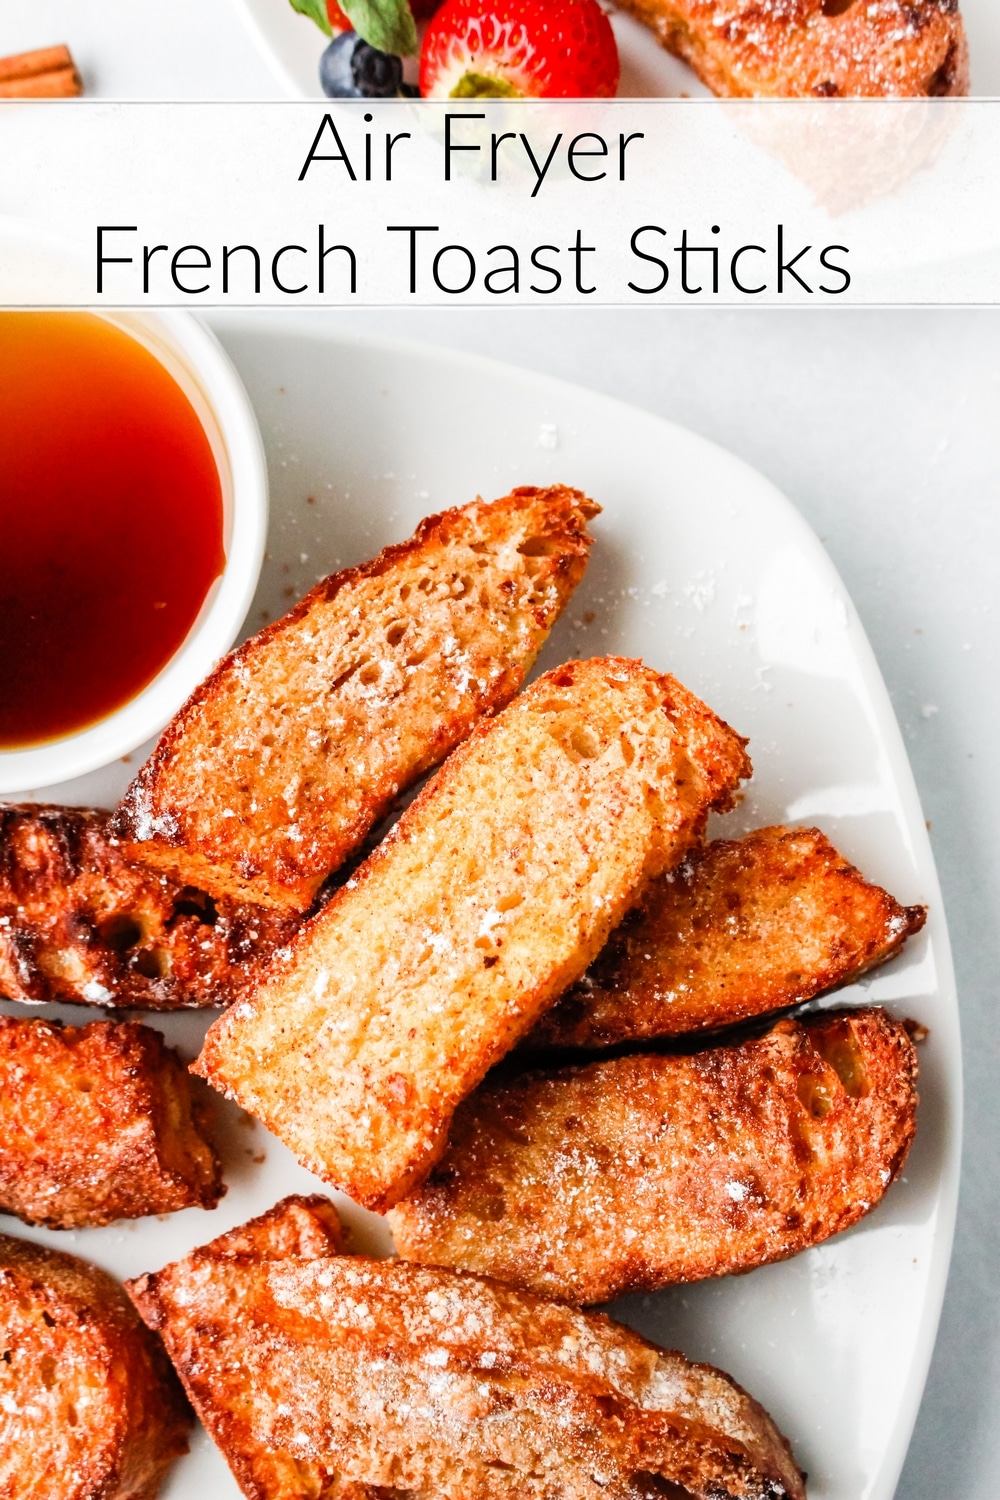 Air Fryer French Toast Sticks - thick, dunkable slices of bread, air-fried to perfection, when you want a special breakfast without all the fuss. via @cmpollak1